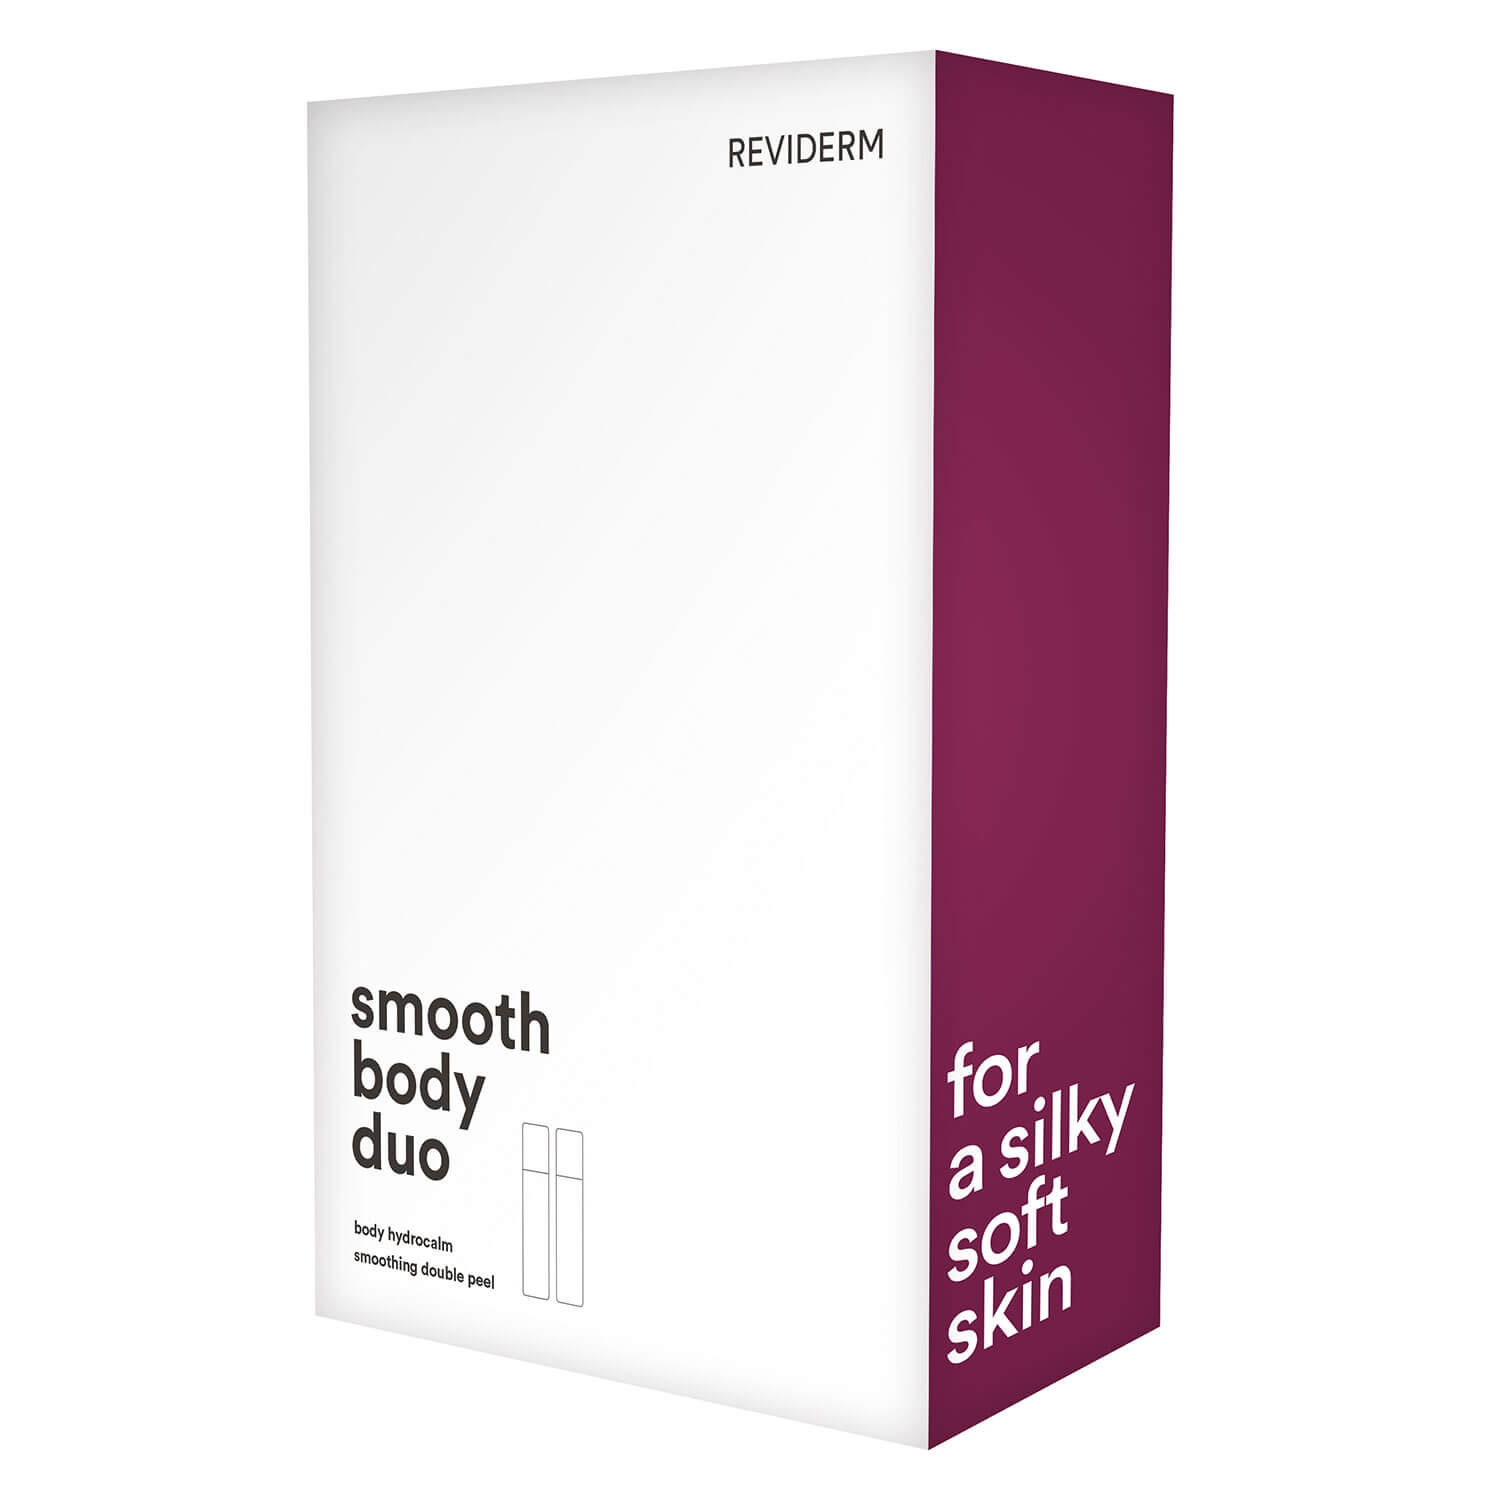 Product image from Reviderm Skin Care - smooth body duo Set